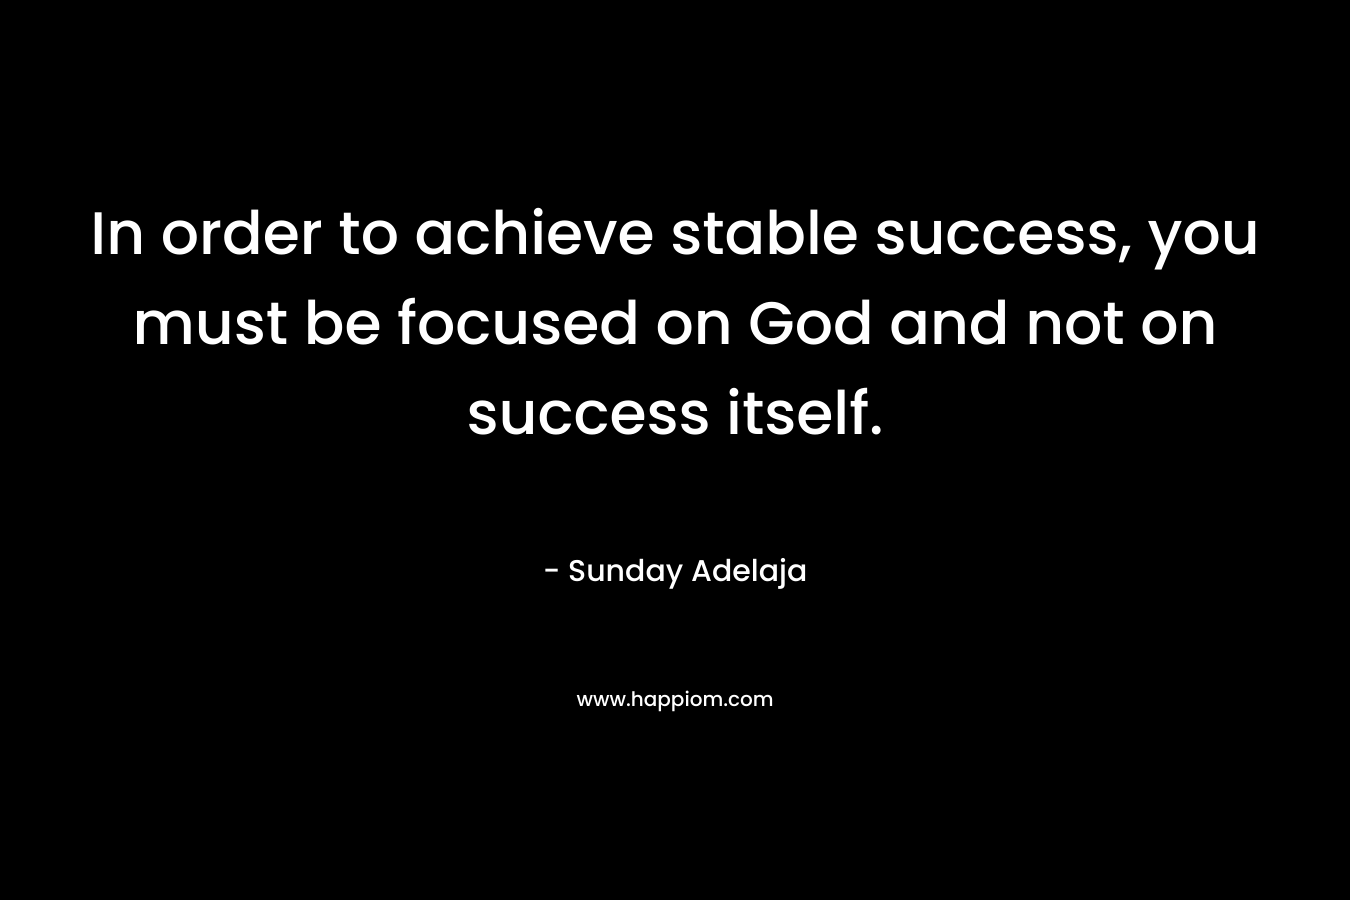 In order to achieve stable success, you must be focused on God and not on success itself.